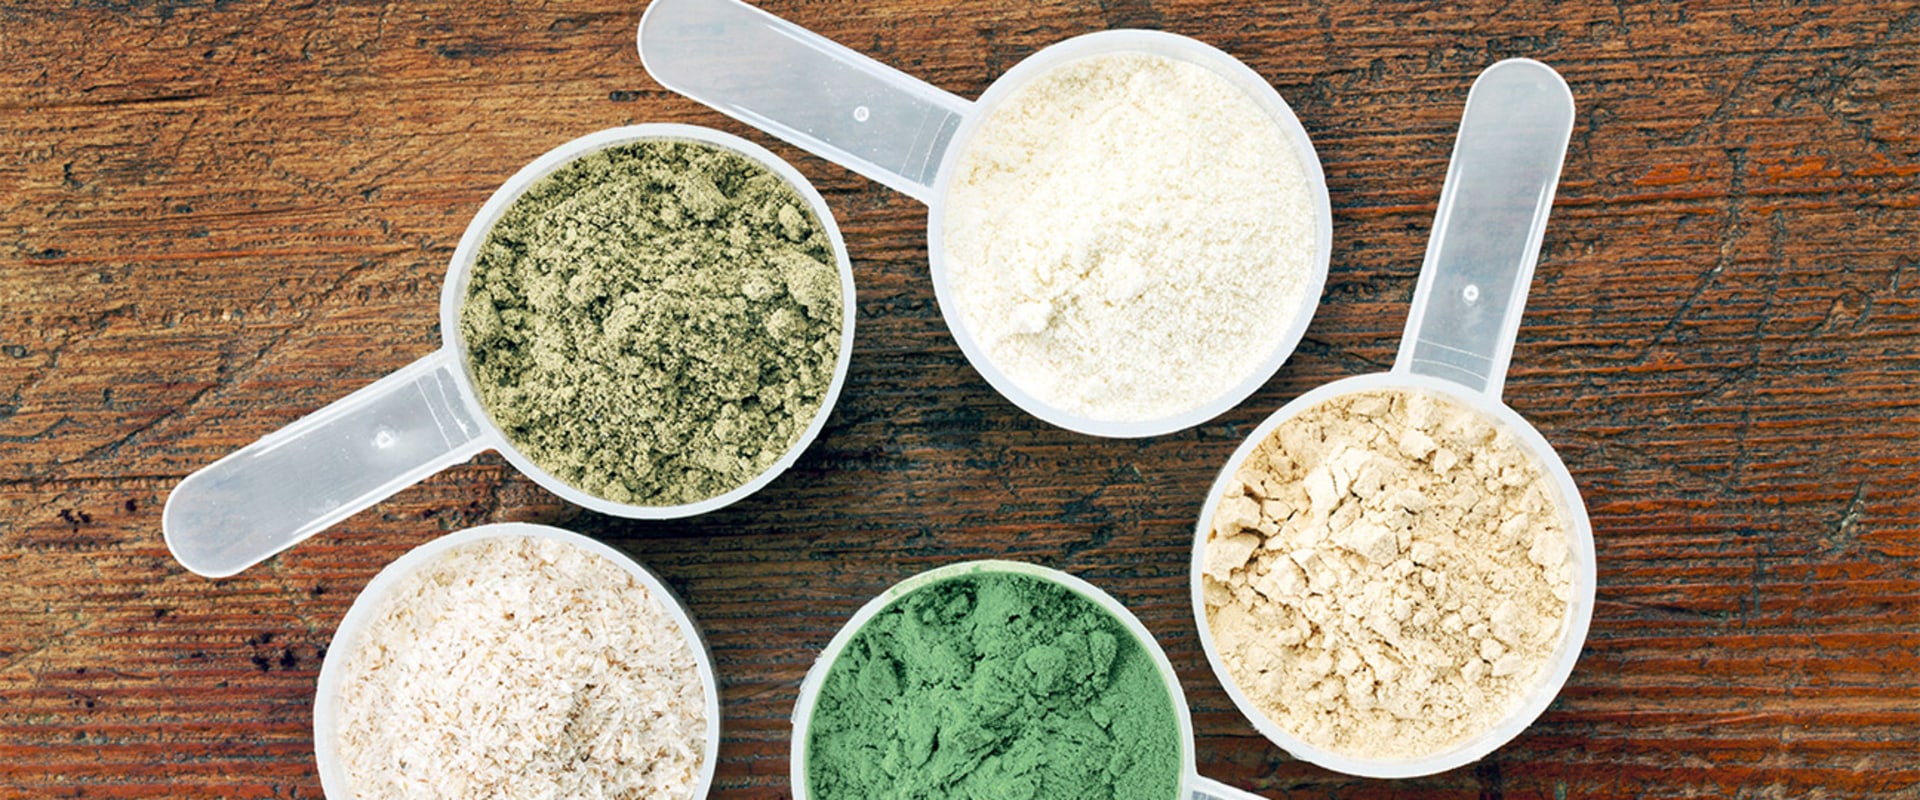 What are the 3 most common types of protein powder?